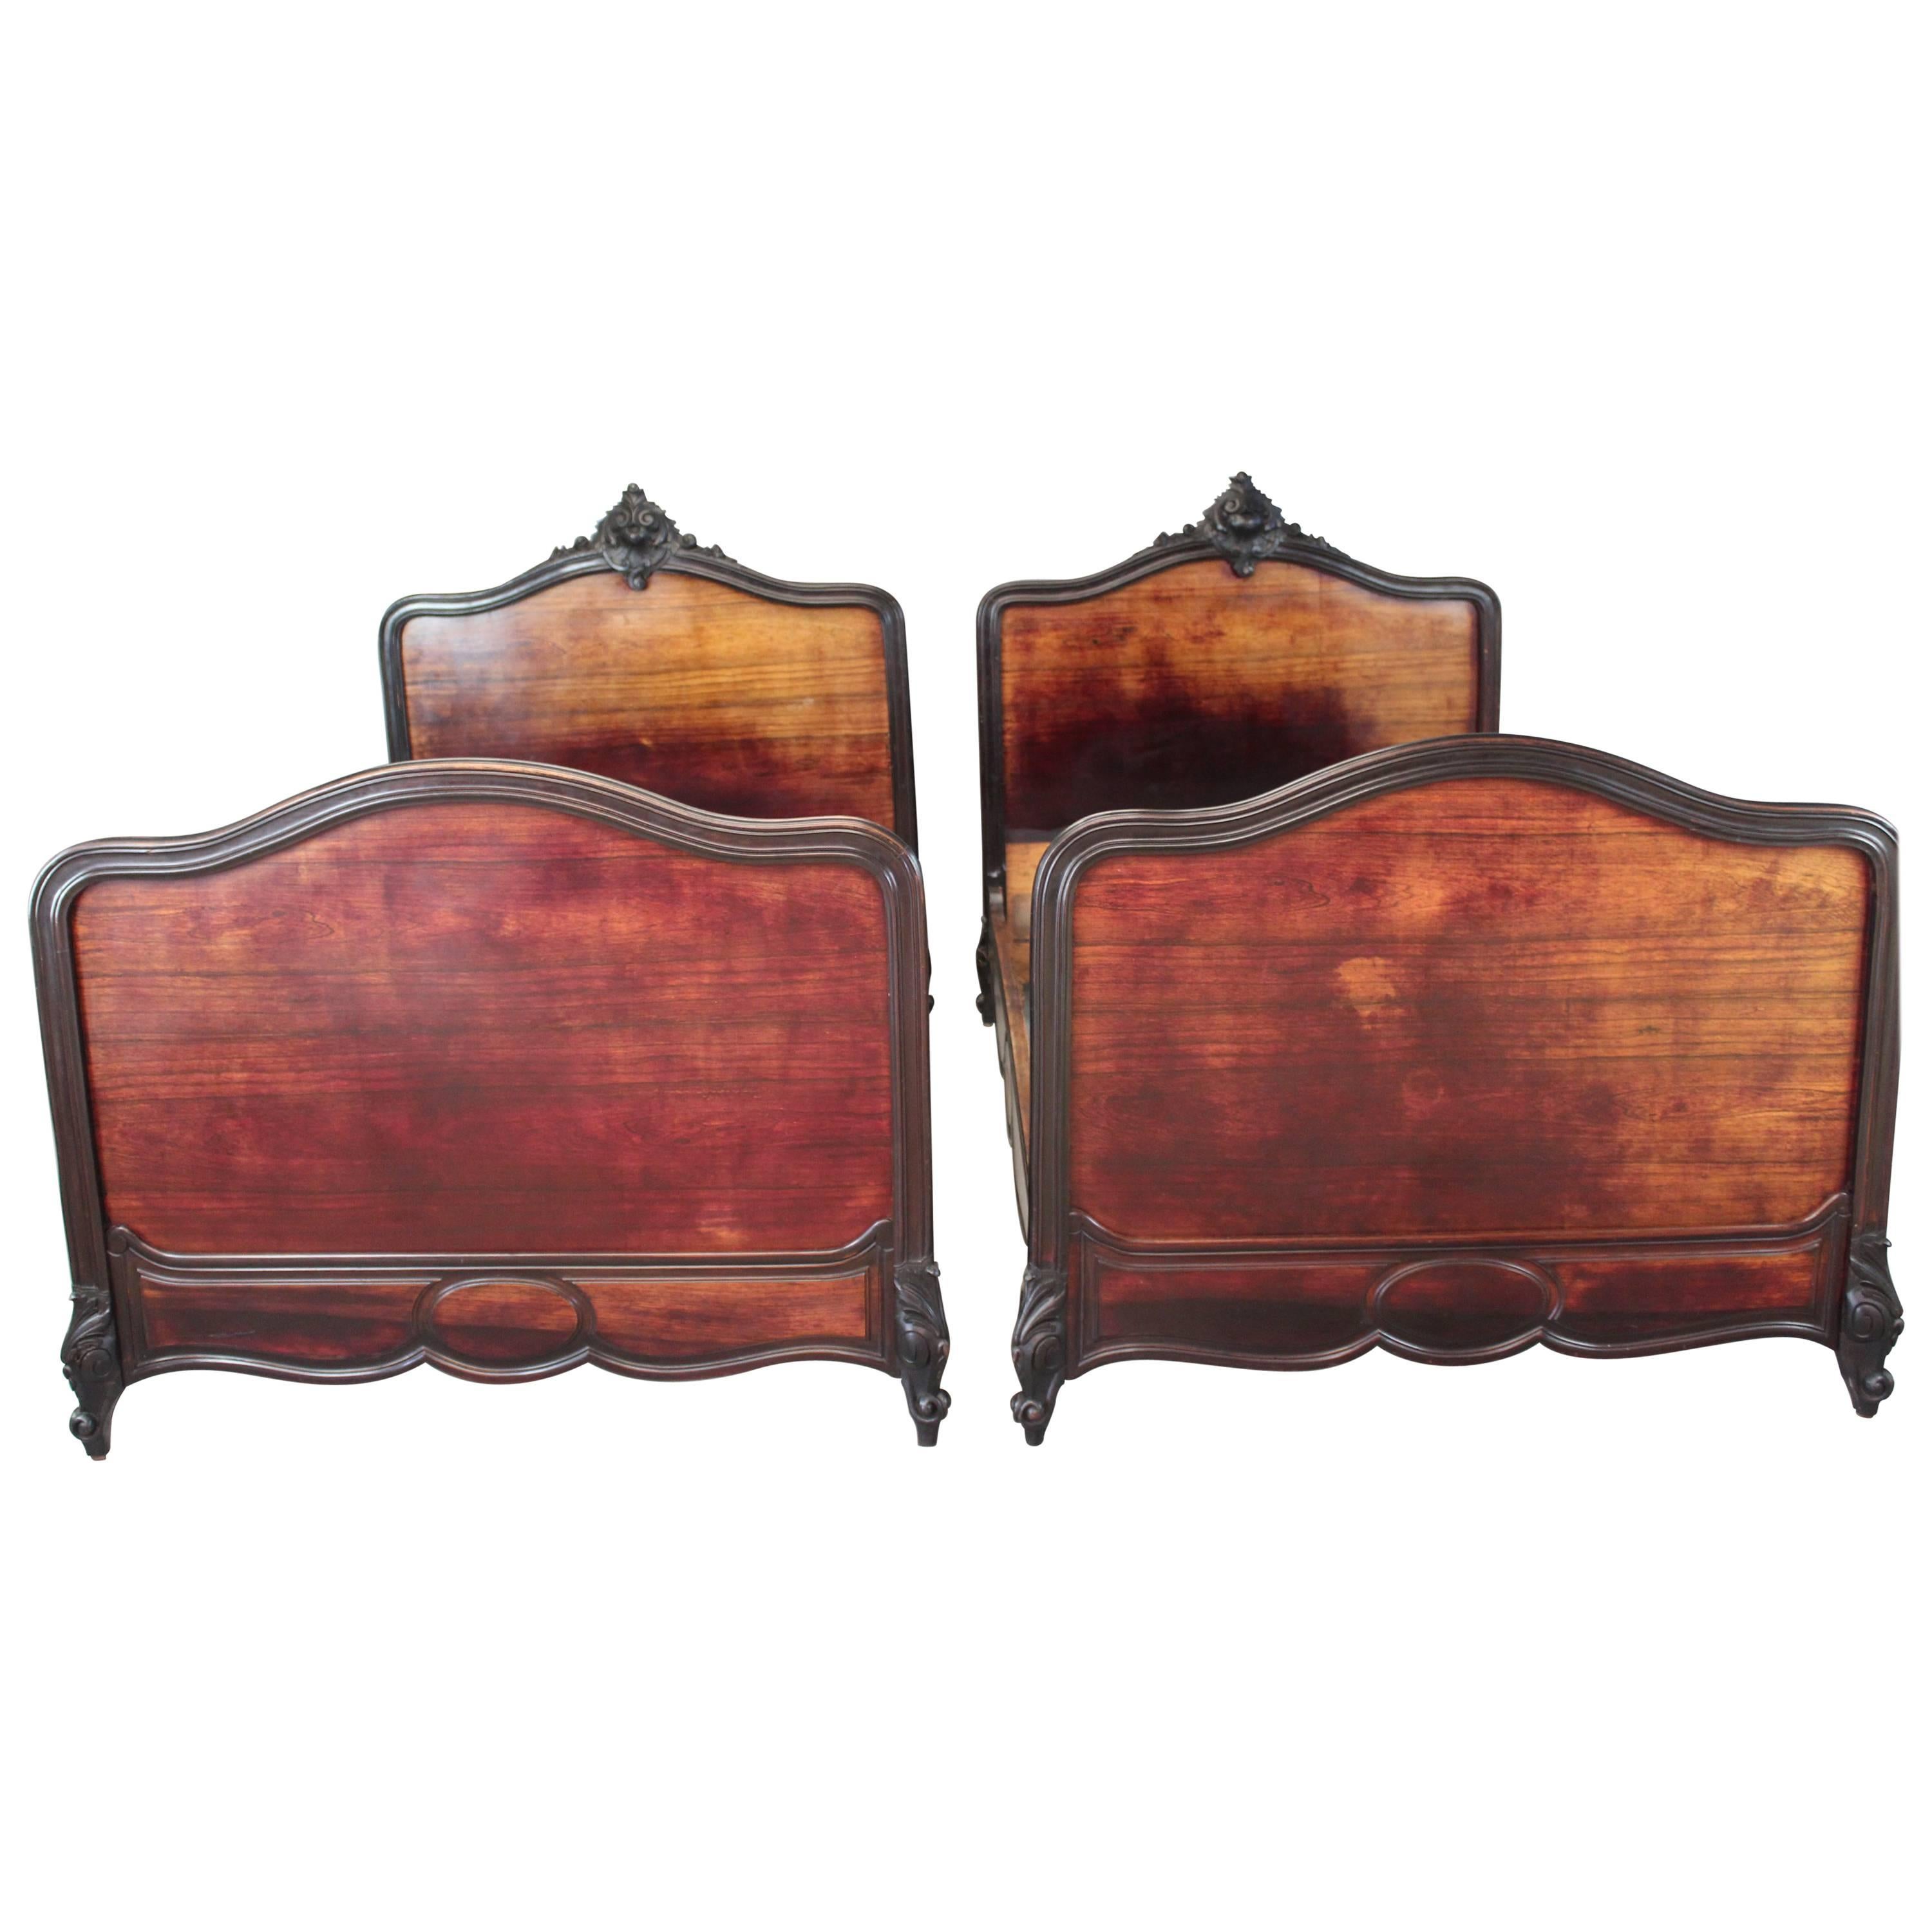 Pair of Antique French Rosewood Beds For Sale